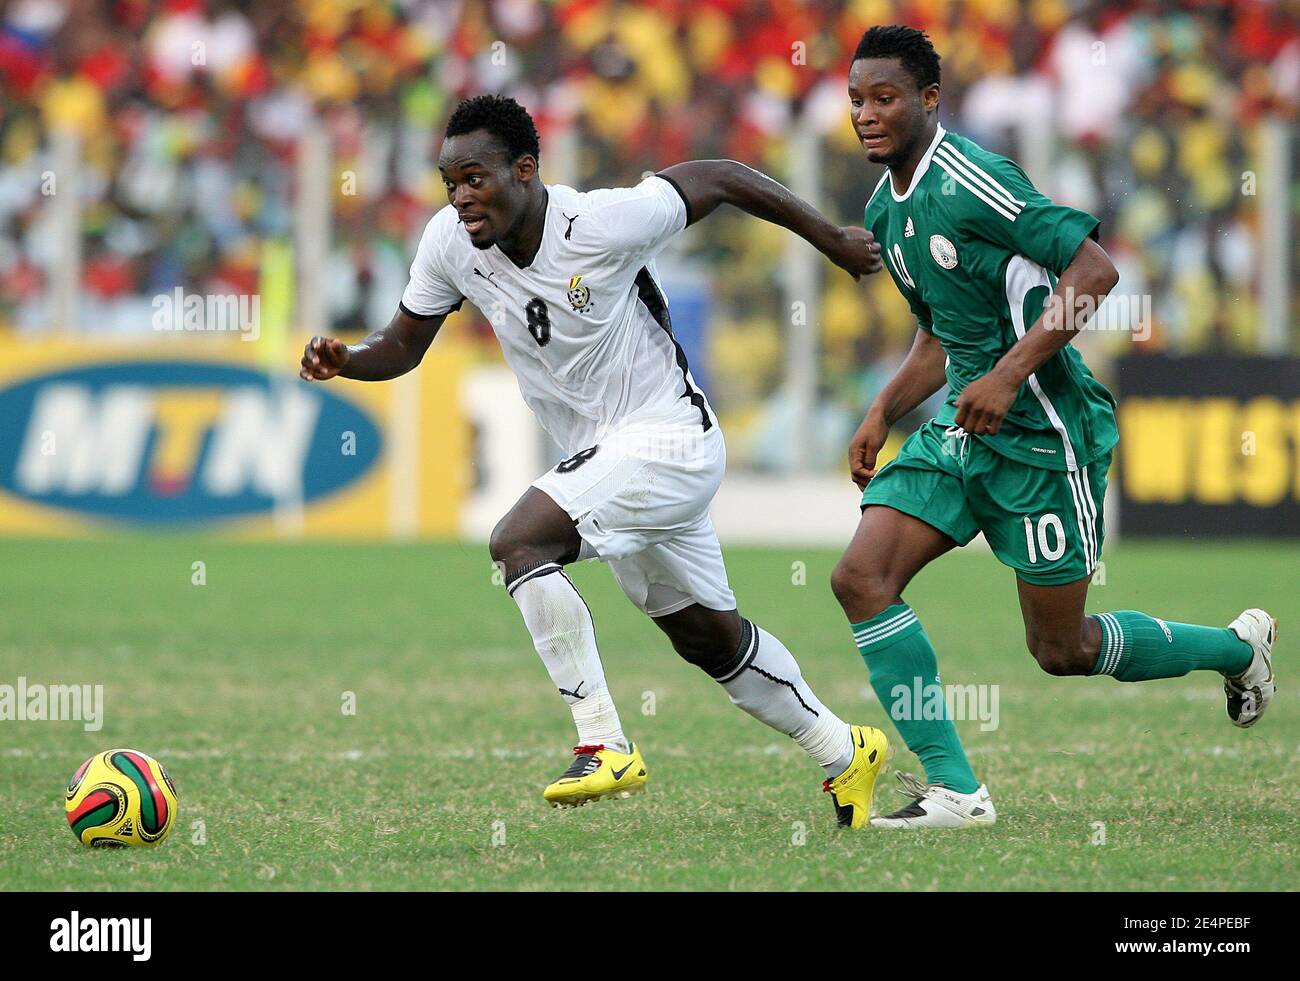 Ghana's Essien Michael is challenged by Nigeria's John Obi Mikel during the African Cup of Nations, quarter finals, soccer match, Ghana vs Nigeria in Accra, Ghana on February 3, 2008. The Ghana won 2-1. Photo by Steeve McMay/Cameleon/ABACAPRESS.COM Stock Photo